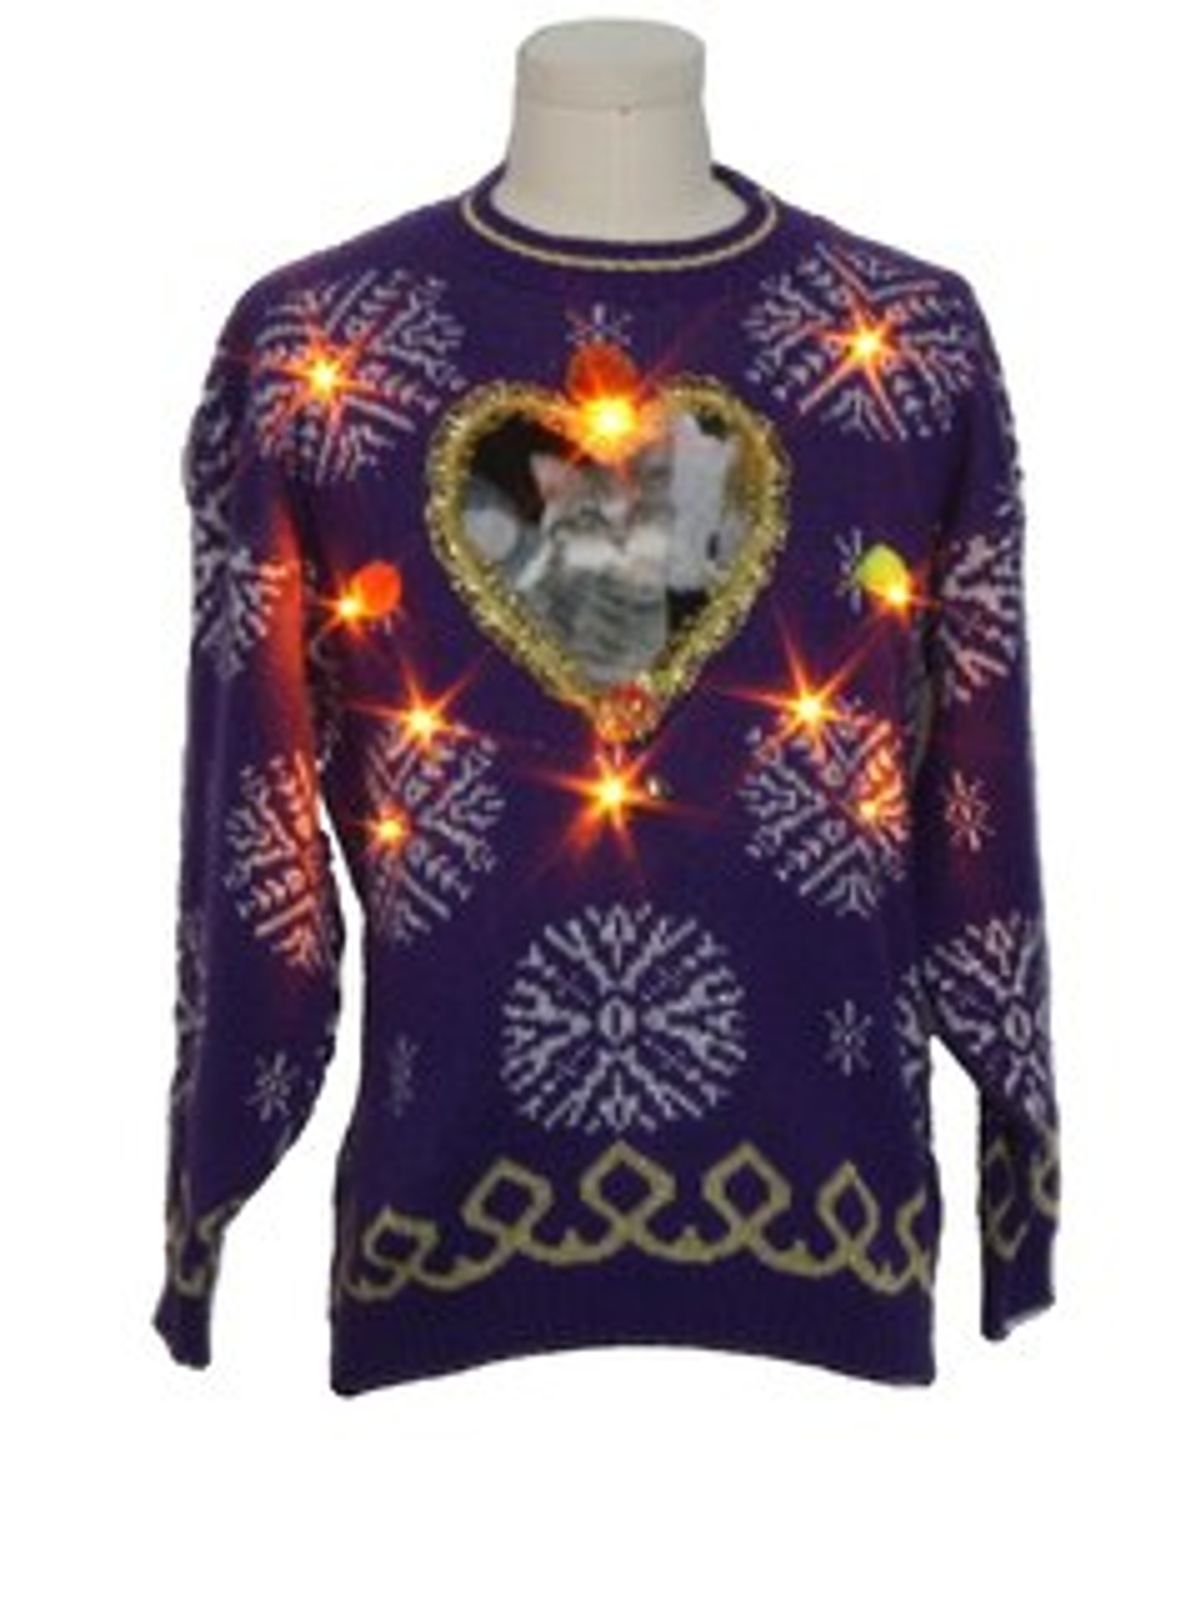 10 Best Ugly Christmas Sweaters